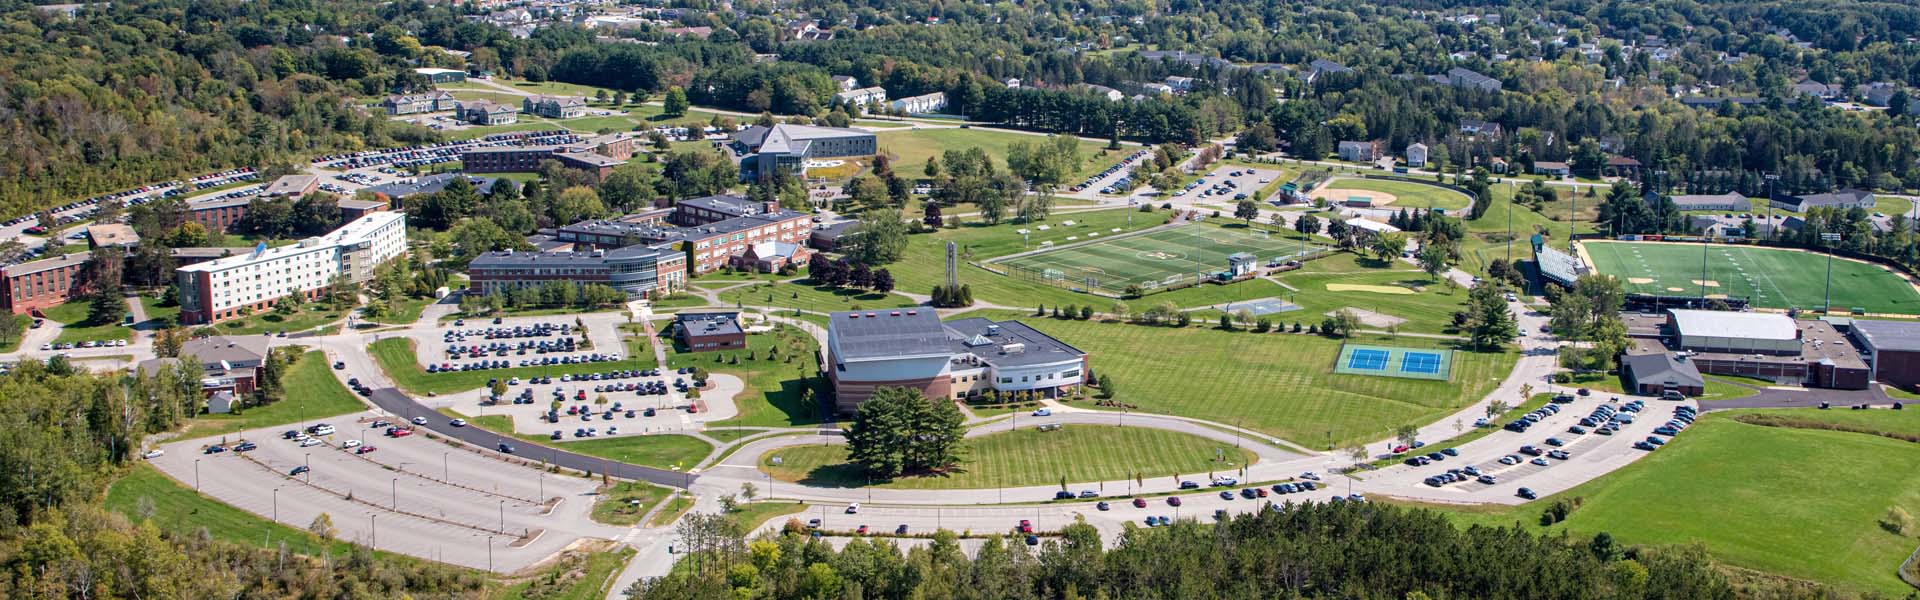 An aerial image of Husson University